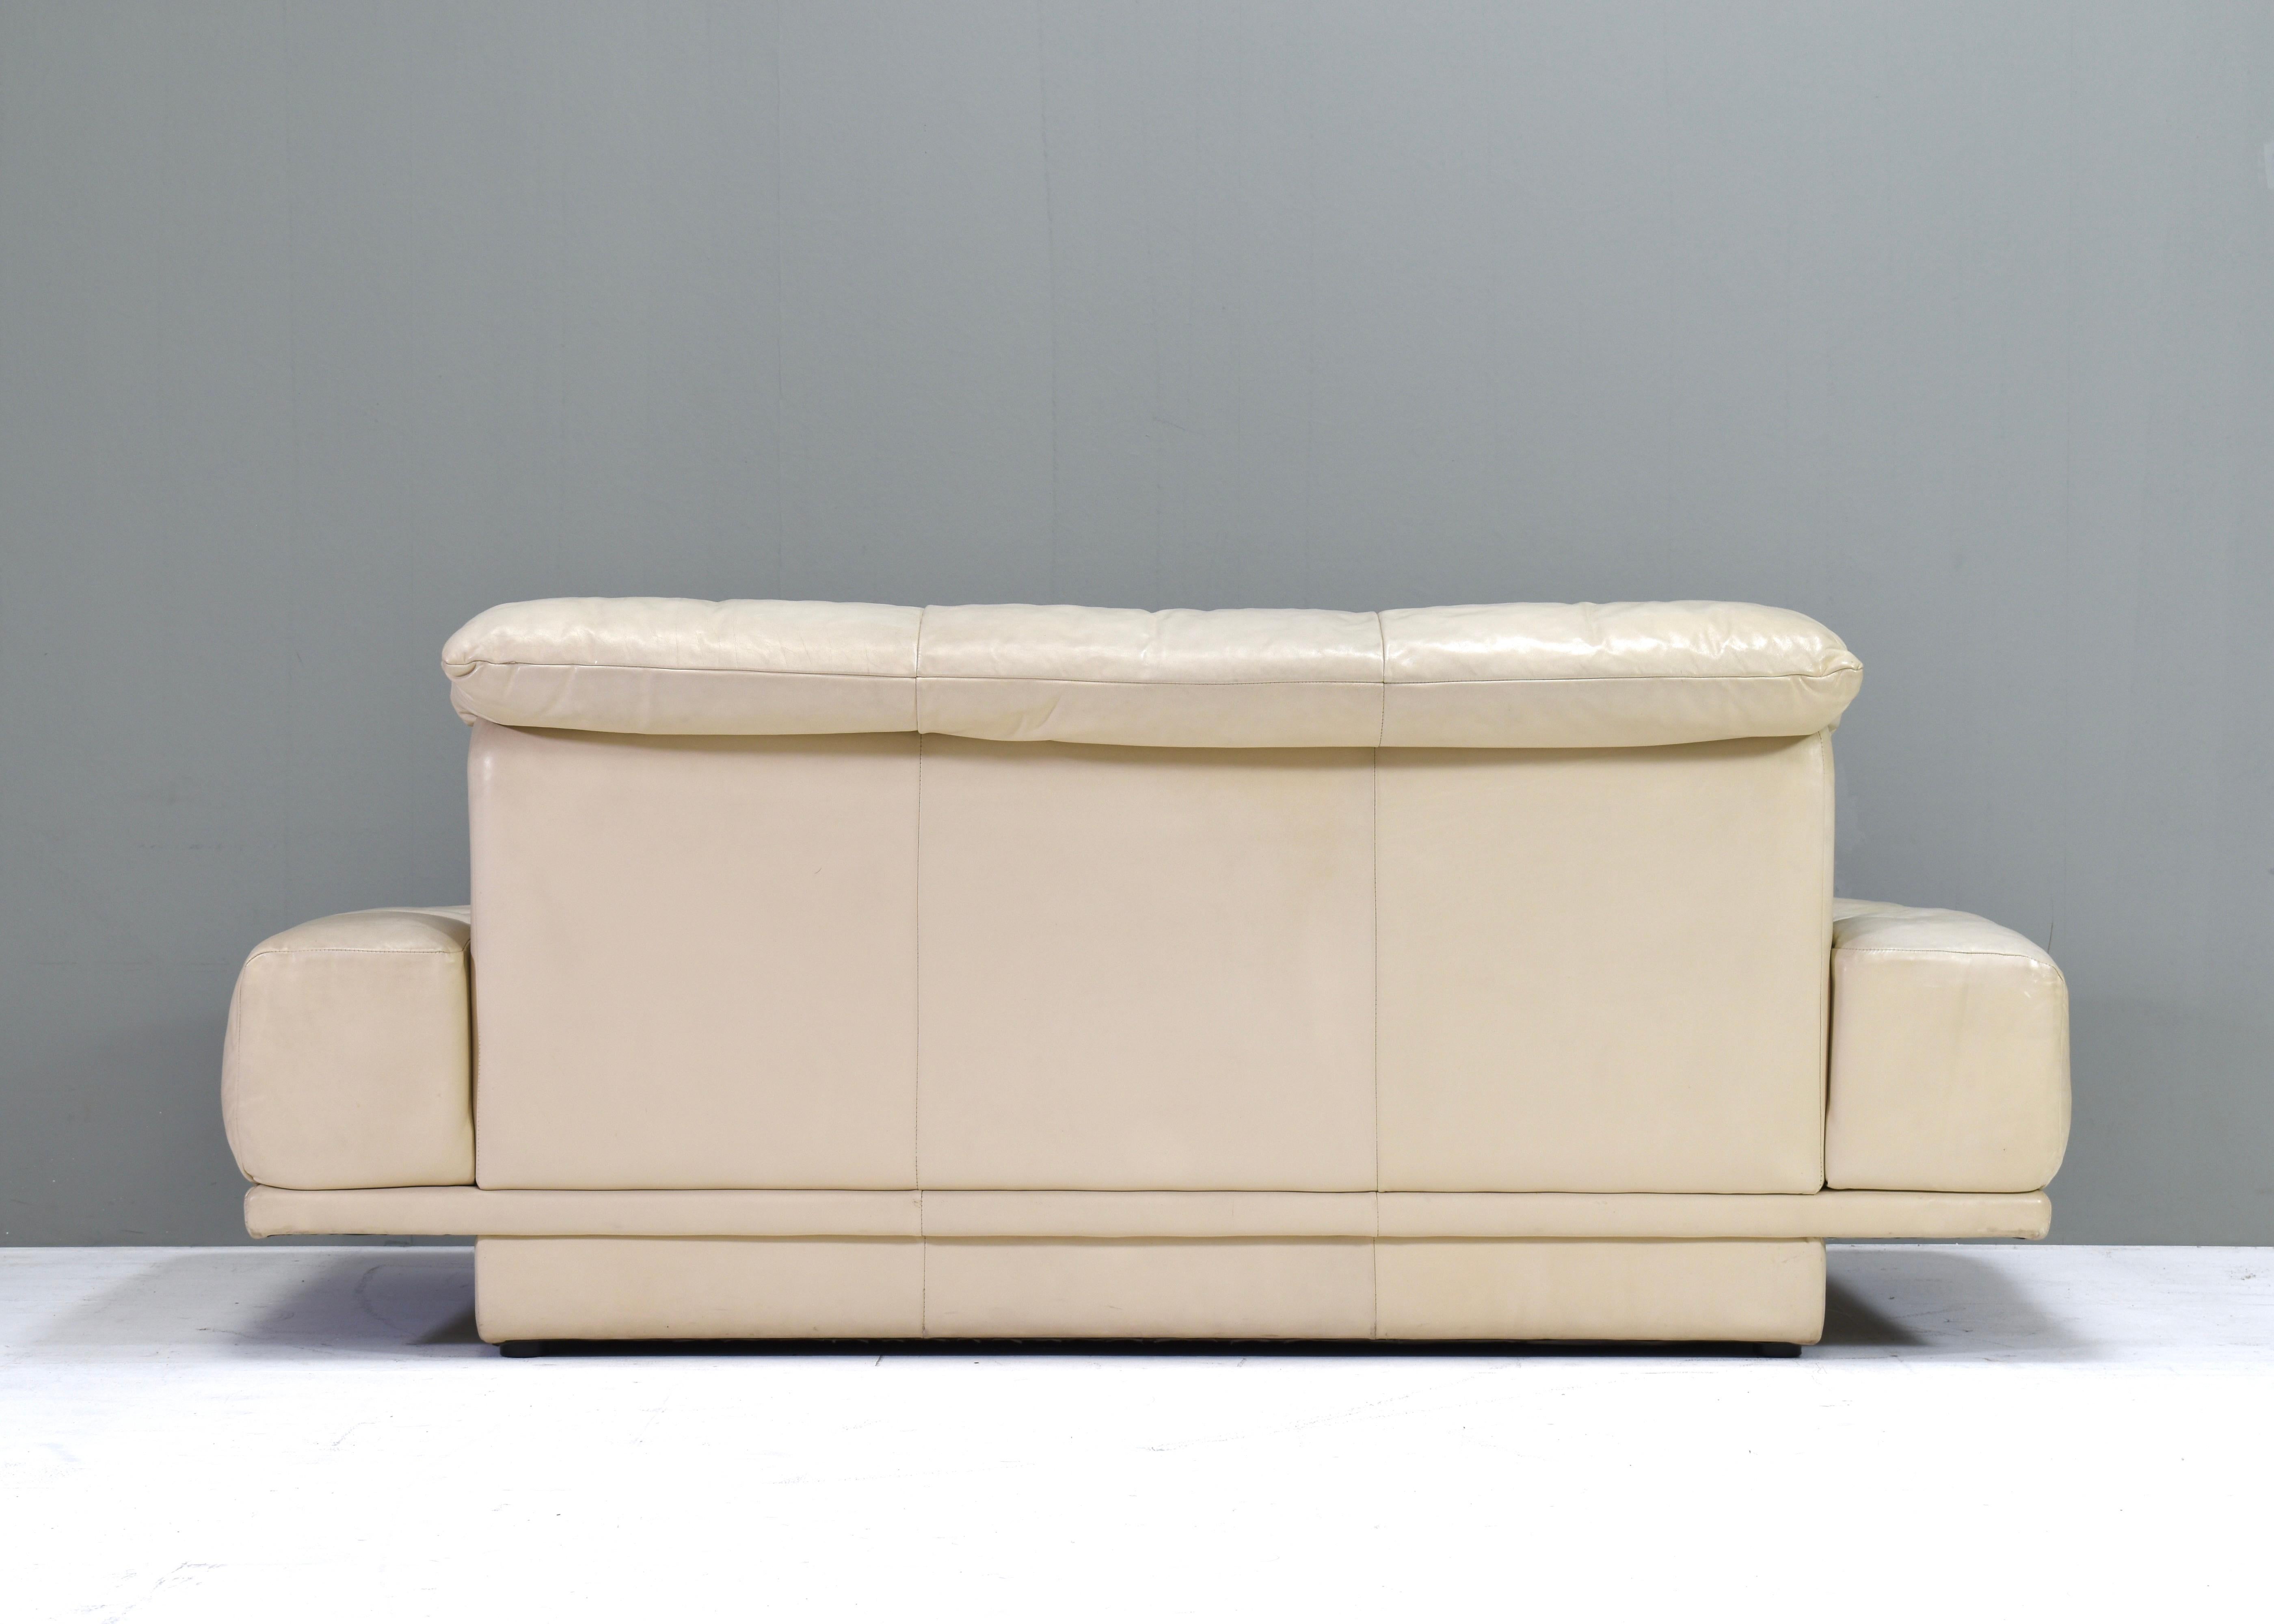 Late 20th Century Rolf Benz 2-seat sofa in Ivory Cream White Leather – Germany, circa 1980-1990 For Sale